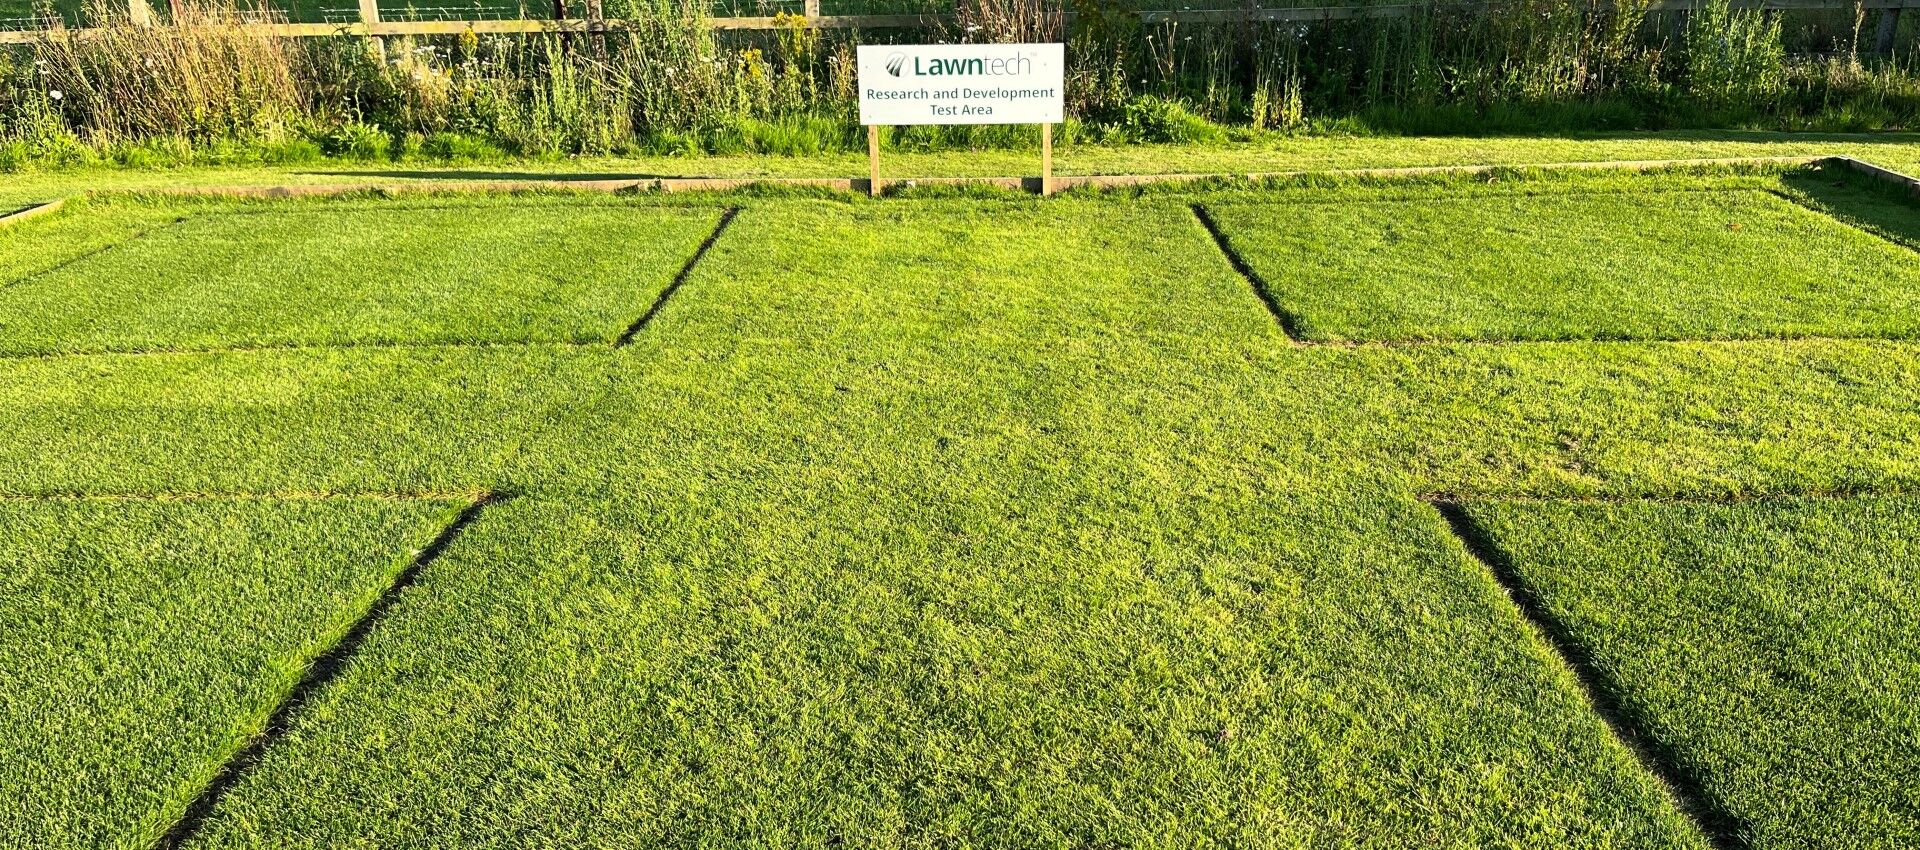 Lawn divided into grids with a 'test area' sign on it